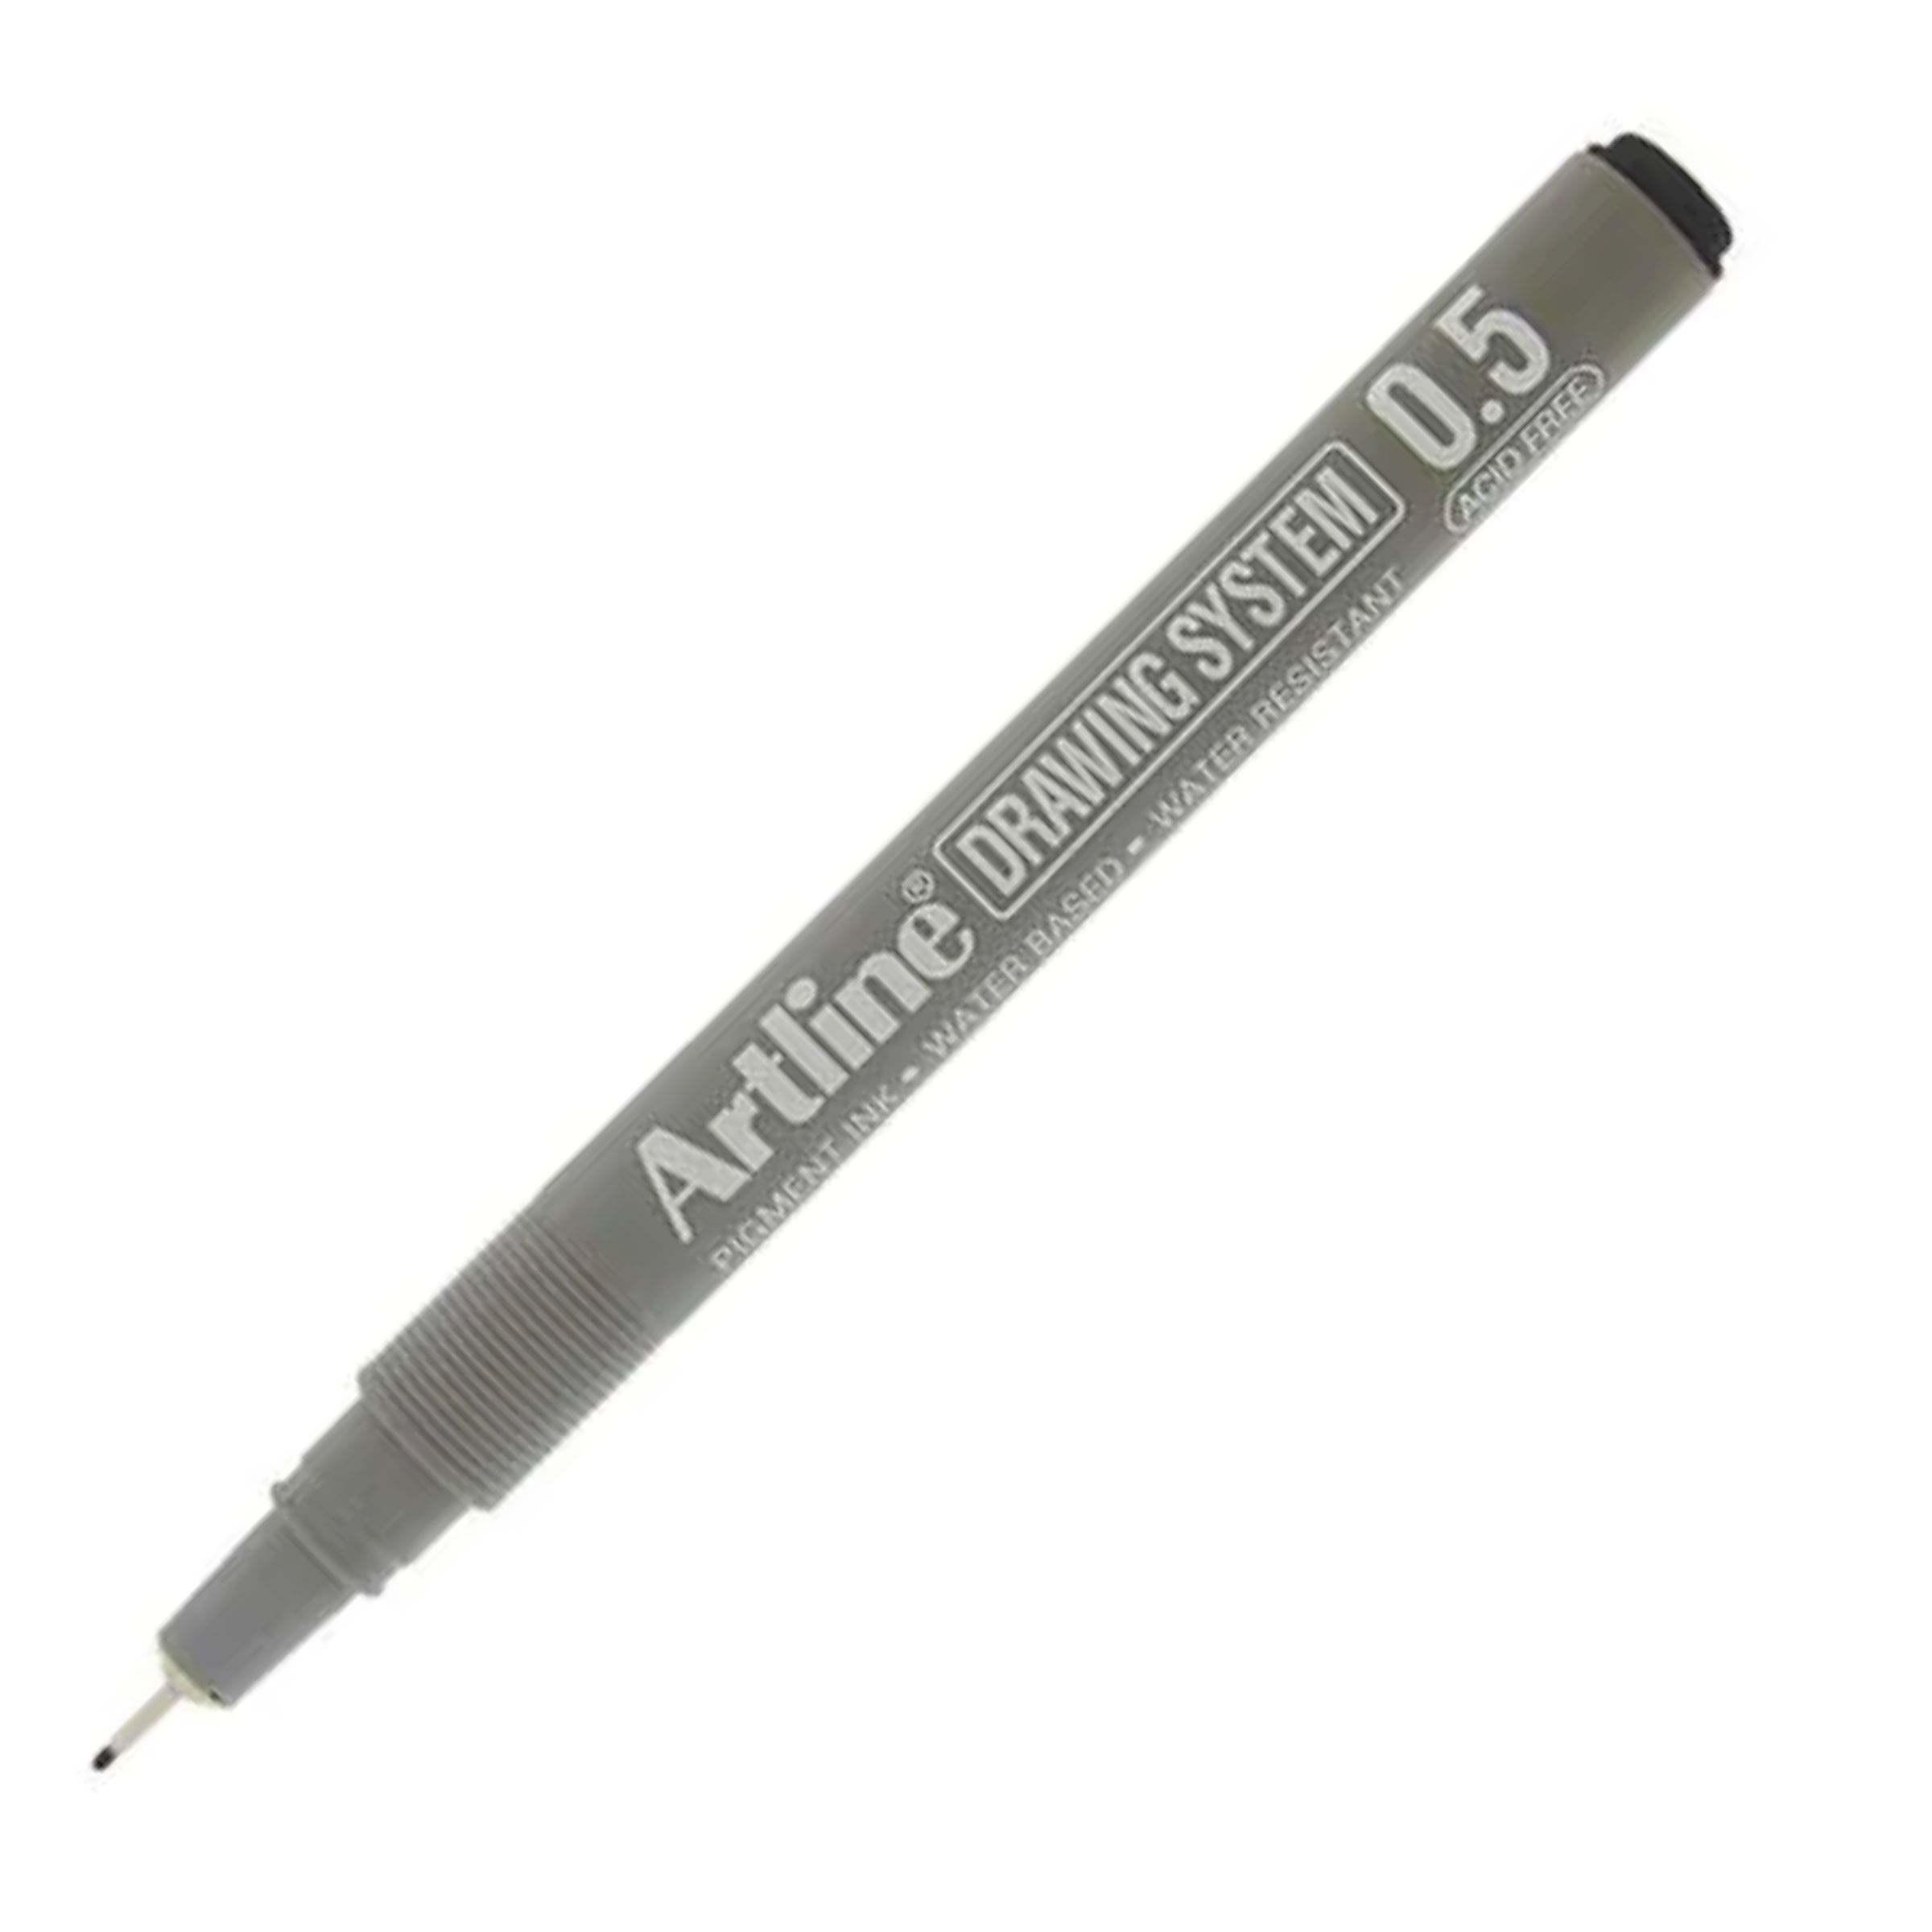 Artline Drawing System Artistic Technical Pen 0.5 mm Point Size Pack of 1